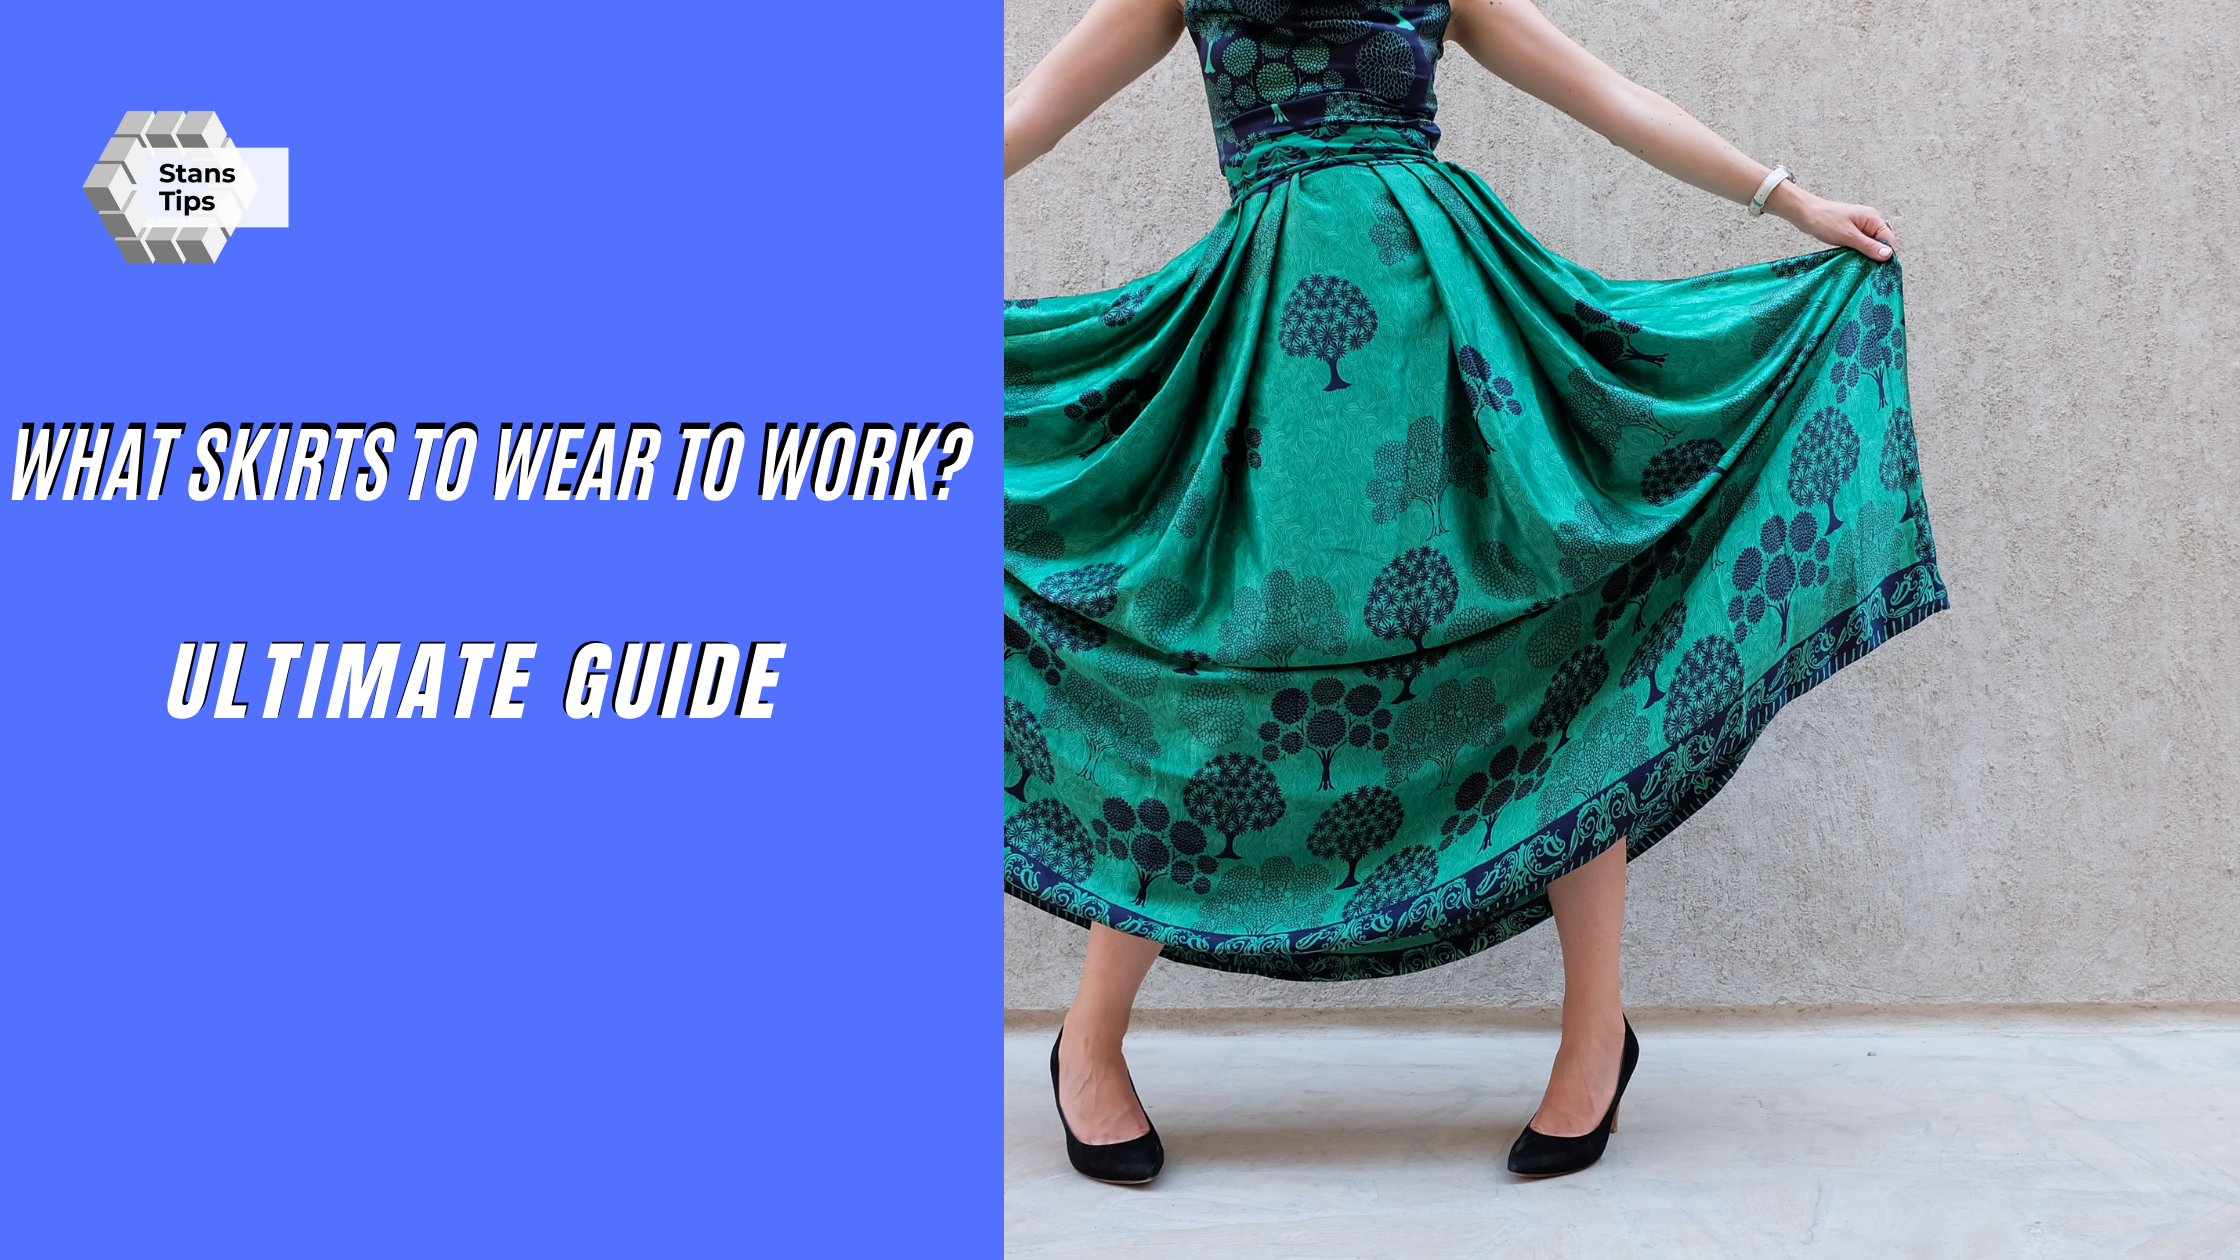 What skirts to wear to work